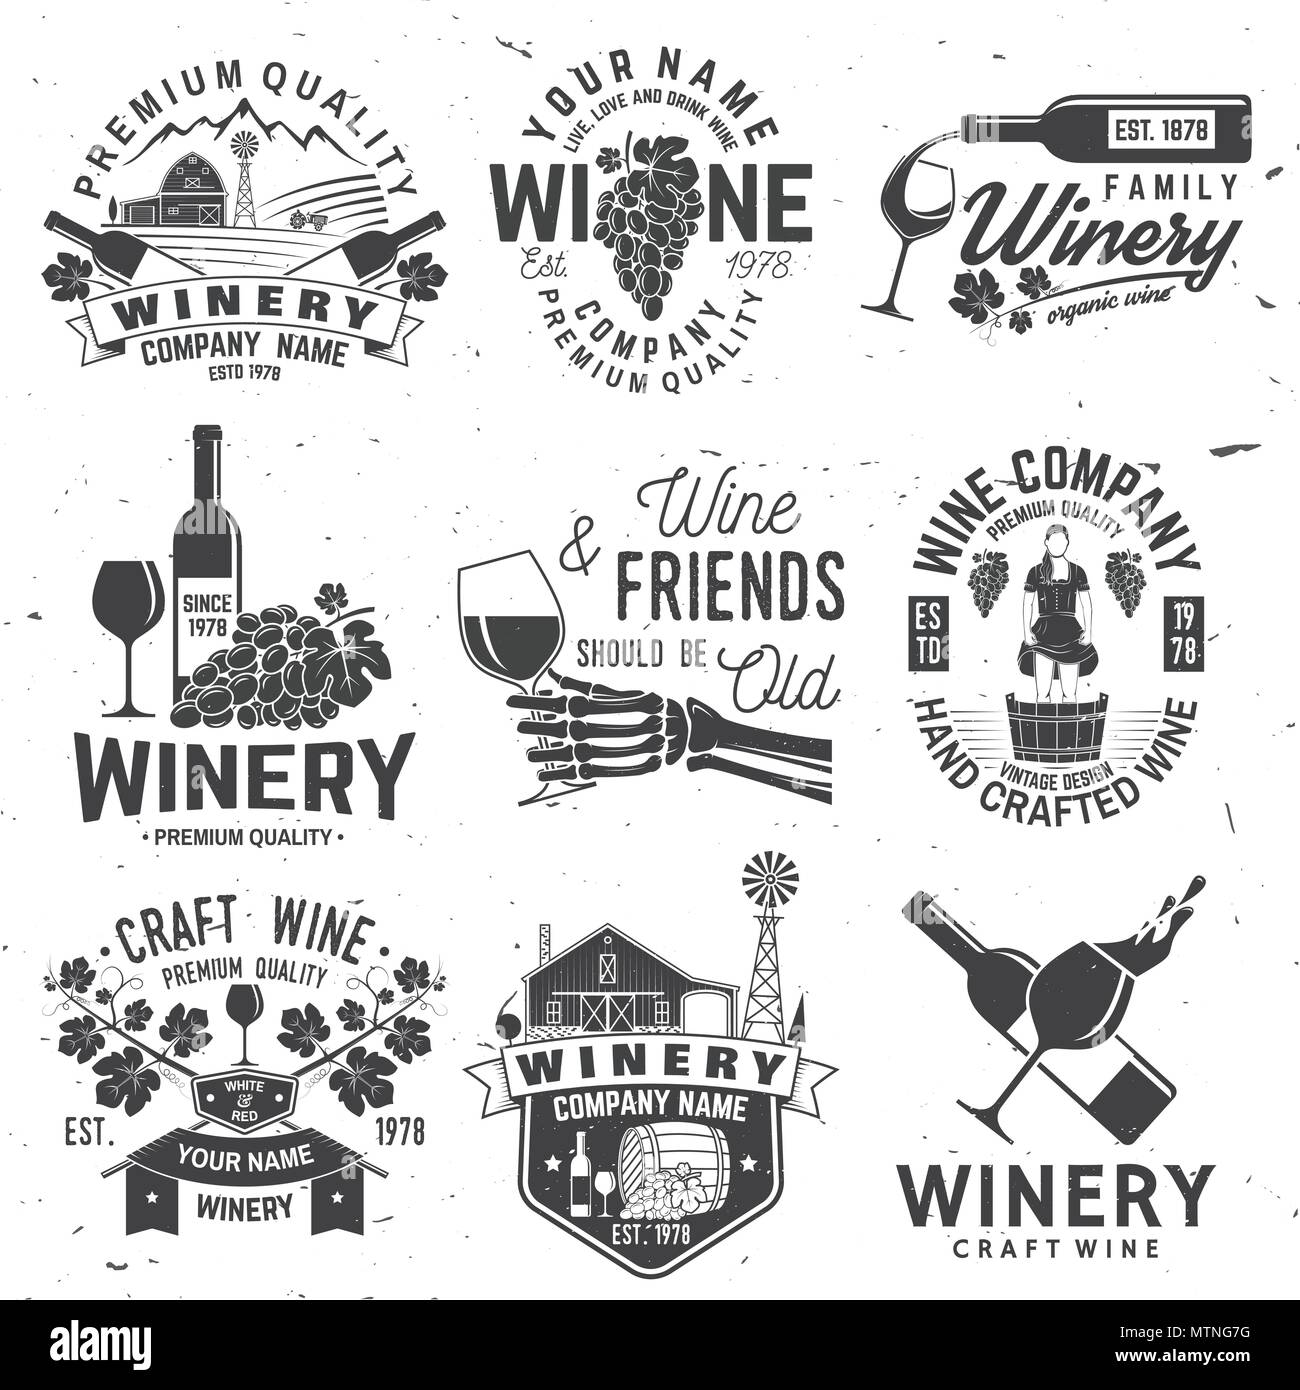 Set of wine company badge, sign or label. Vector illustration. Vintage design for winery company, bar, pub, shop, branding and restaurant business. Coaster for wine glasses Stock Vector